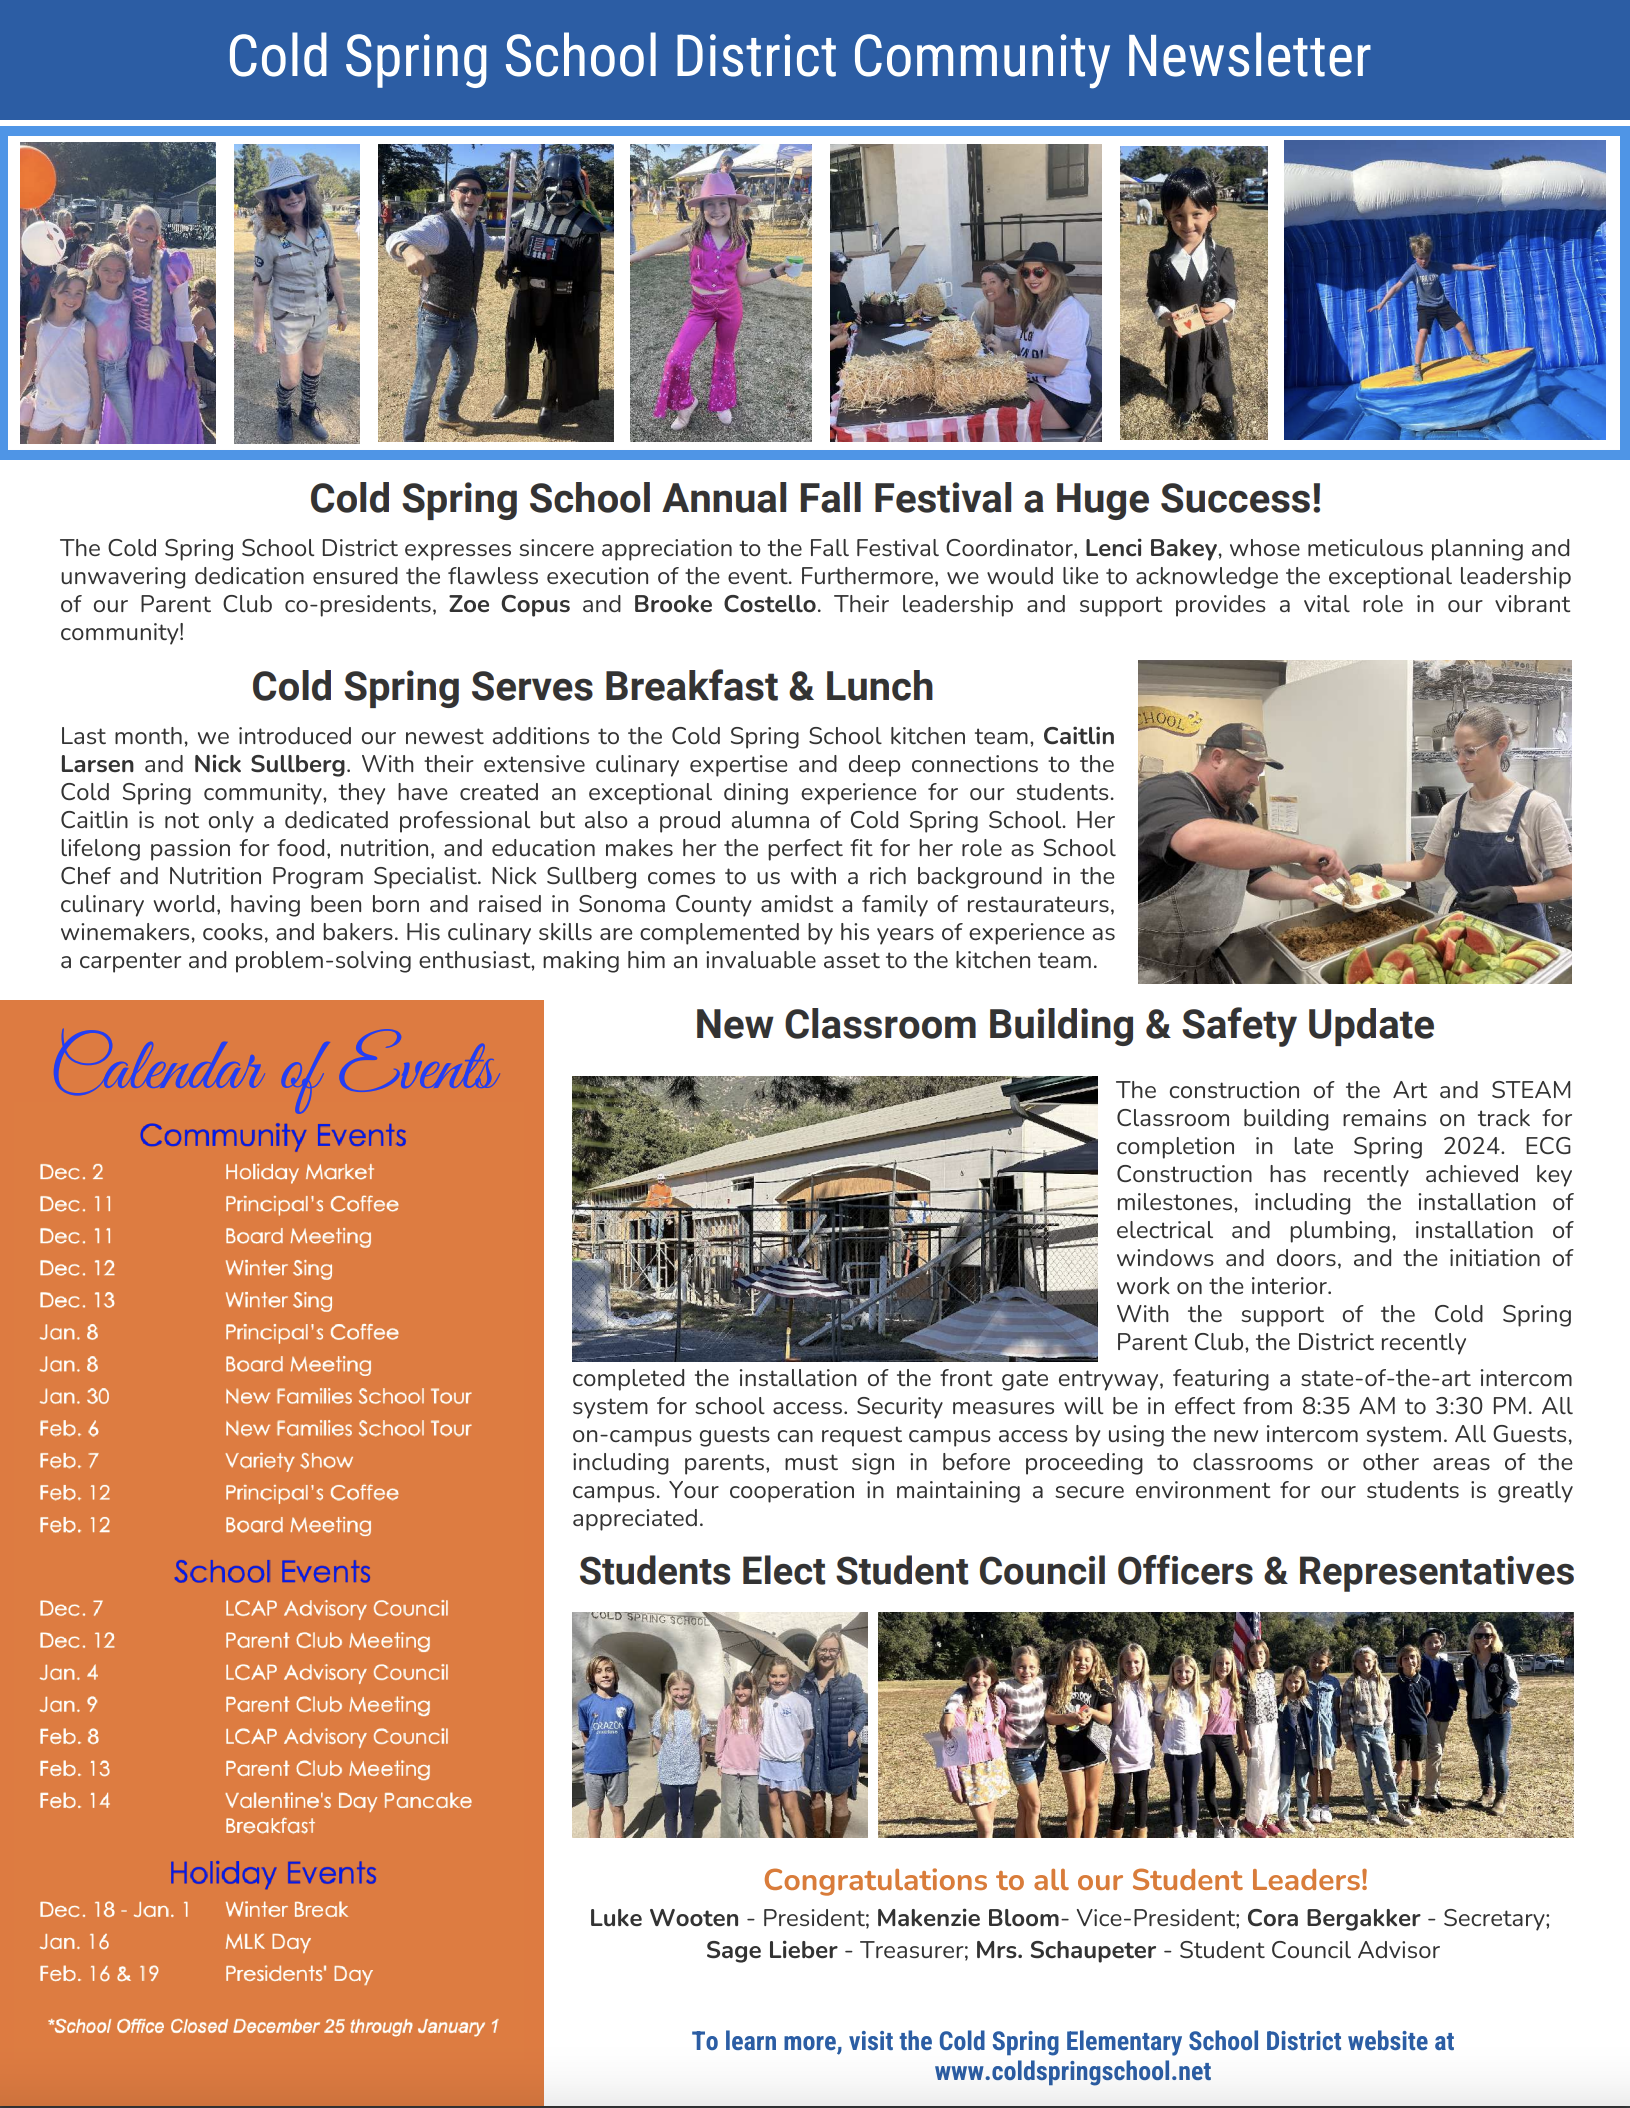 Page 2 of the Community Newsletter